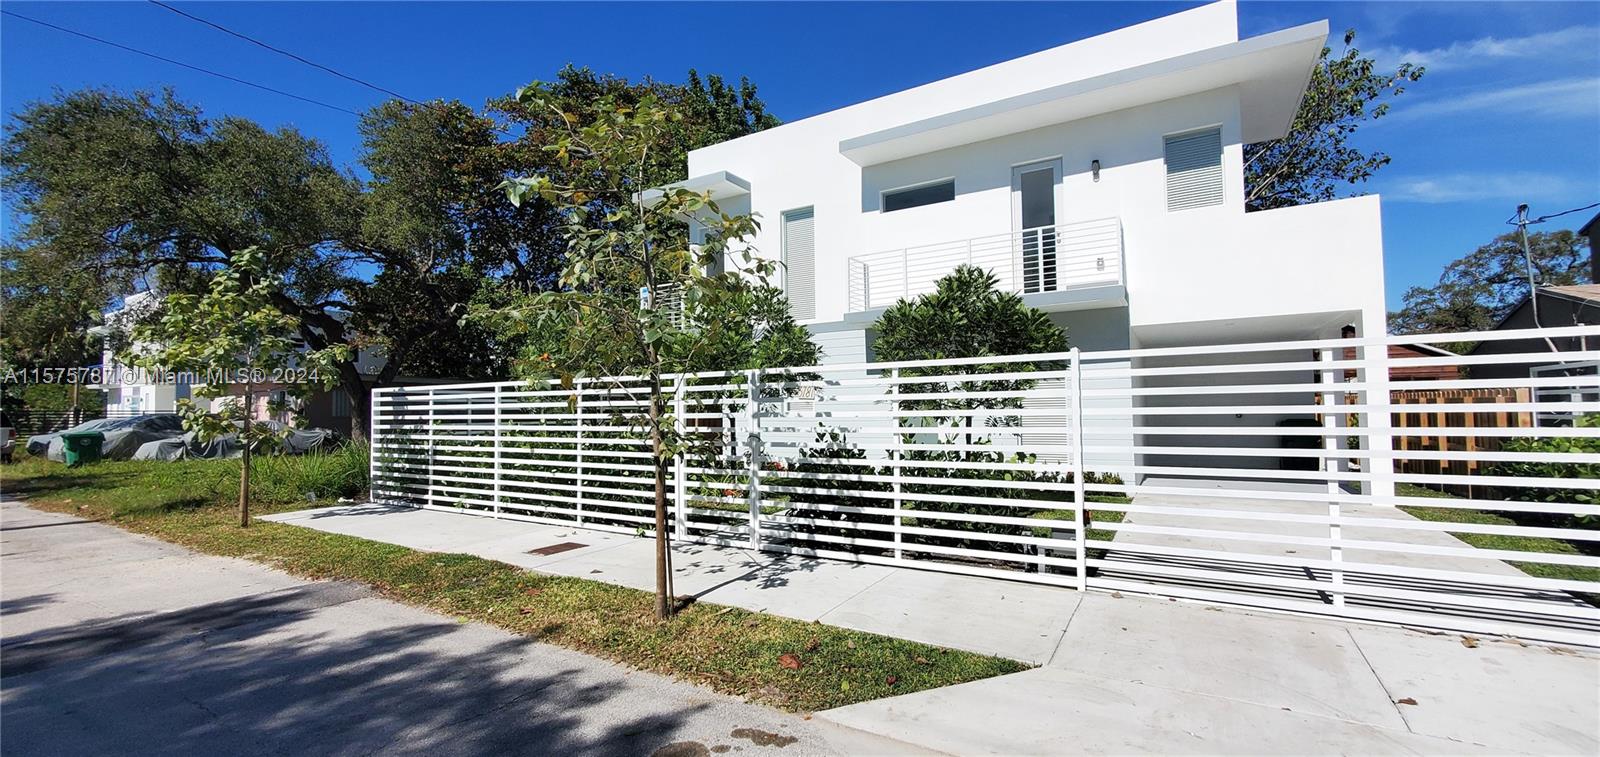 AVAILABLE JUNE 5TH SHOWN BY APPOINTMENT ONLY. 5 BEDROOM 4 BATH MODERN HOME BUILT IN 2022. LARGE BEDROOMS , MANY BALCONIES, ONE LIVING ROOM ON EVERY FLOOR,LARGE PATIO AREA, CLOSE TO ALL COCONUT GROVE HAS TO OFFER, WALKING DISTANCE TO COCONUT GROVE FARMERS MARKET AND ALL SHOPS AND RESTAURANTS.